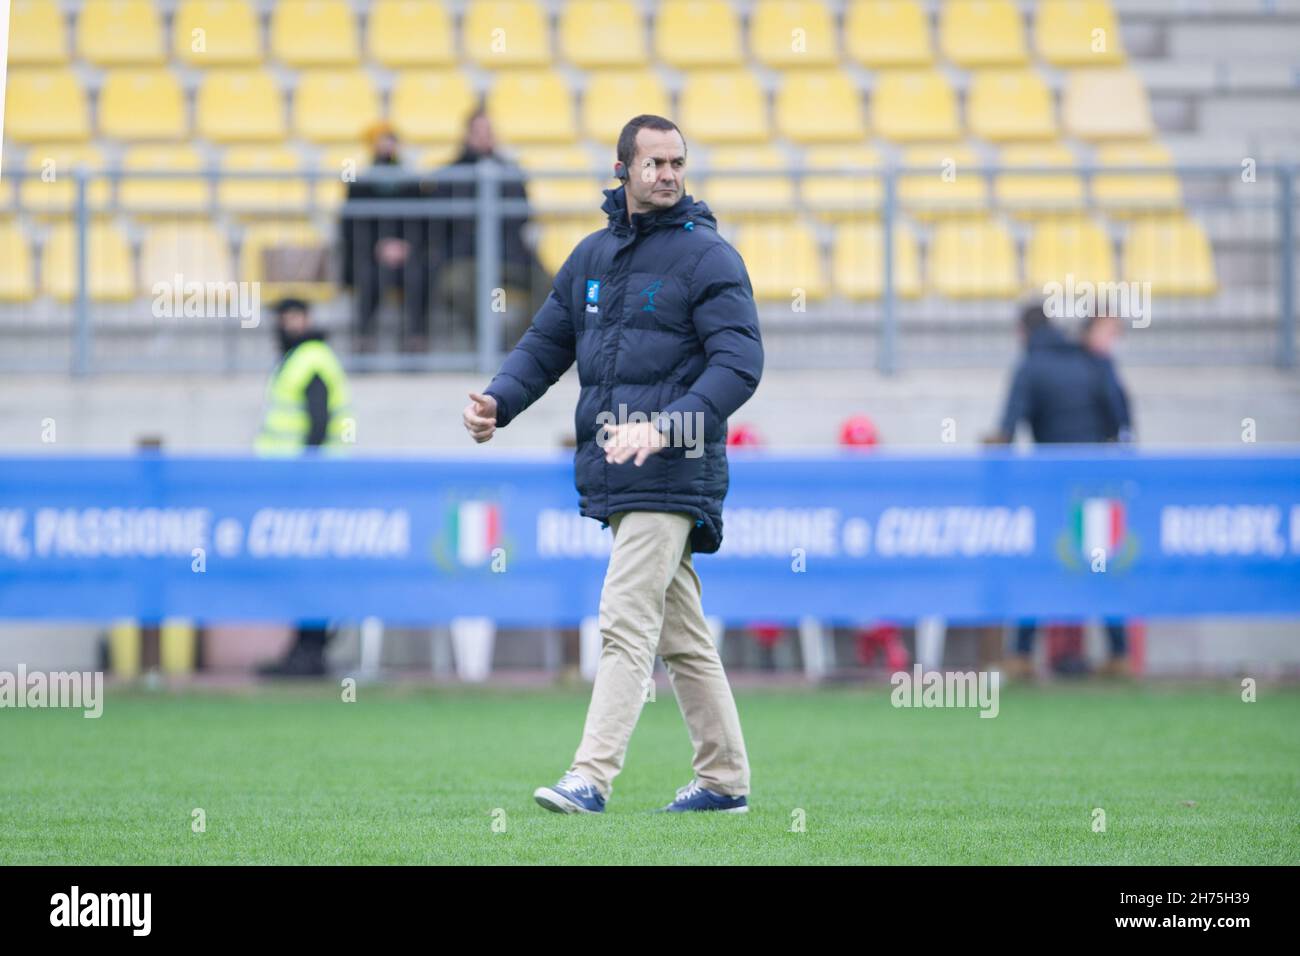 Parma, Italy. 20th Nov, 2021. Italy vs Uruguay, Autumn Nations Series rugby match in Parma, Italy, November 20 2021 Credit: Independent Photo Agency/Alamy Live News Stock Photo